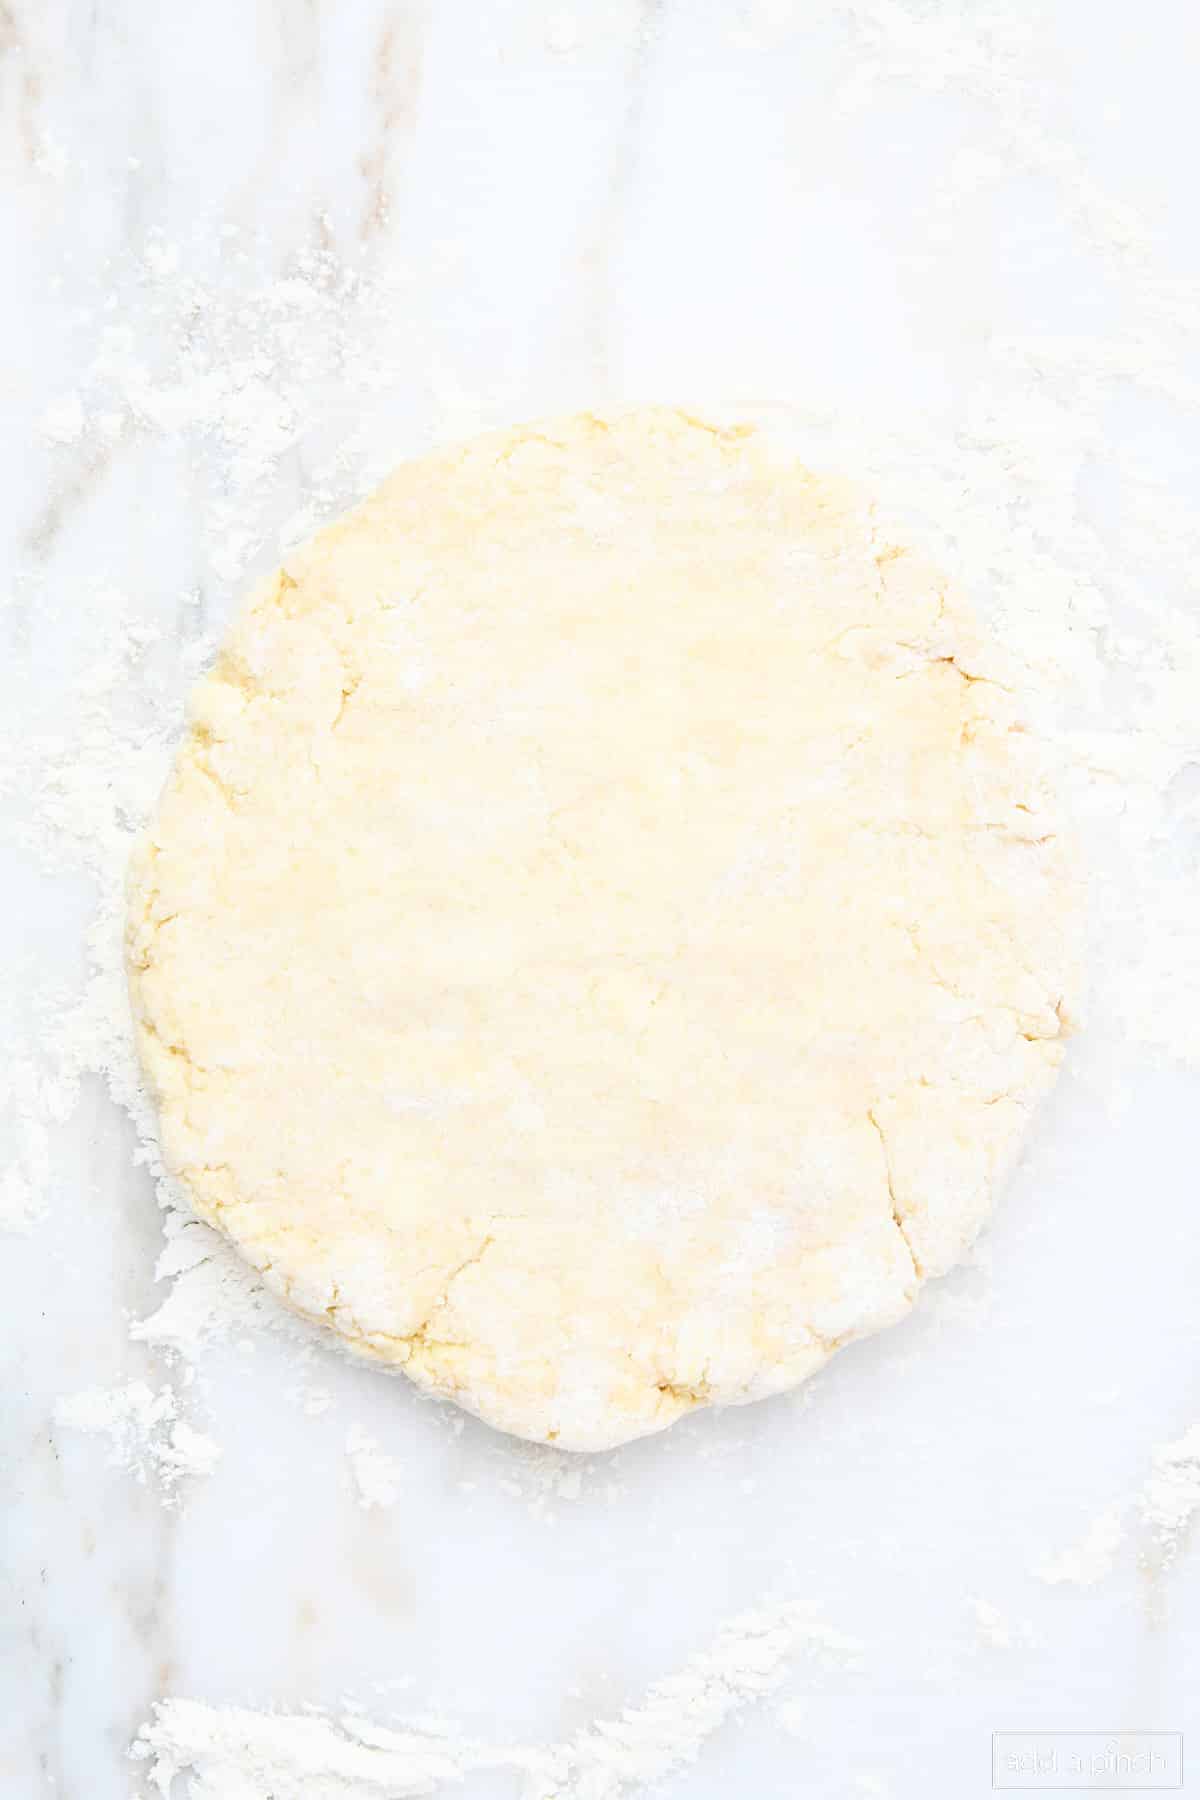 Easy scones recipe dough patted into a disc on a lightly floured marble surface.